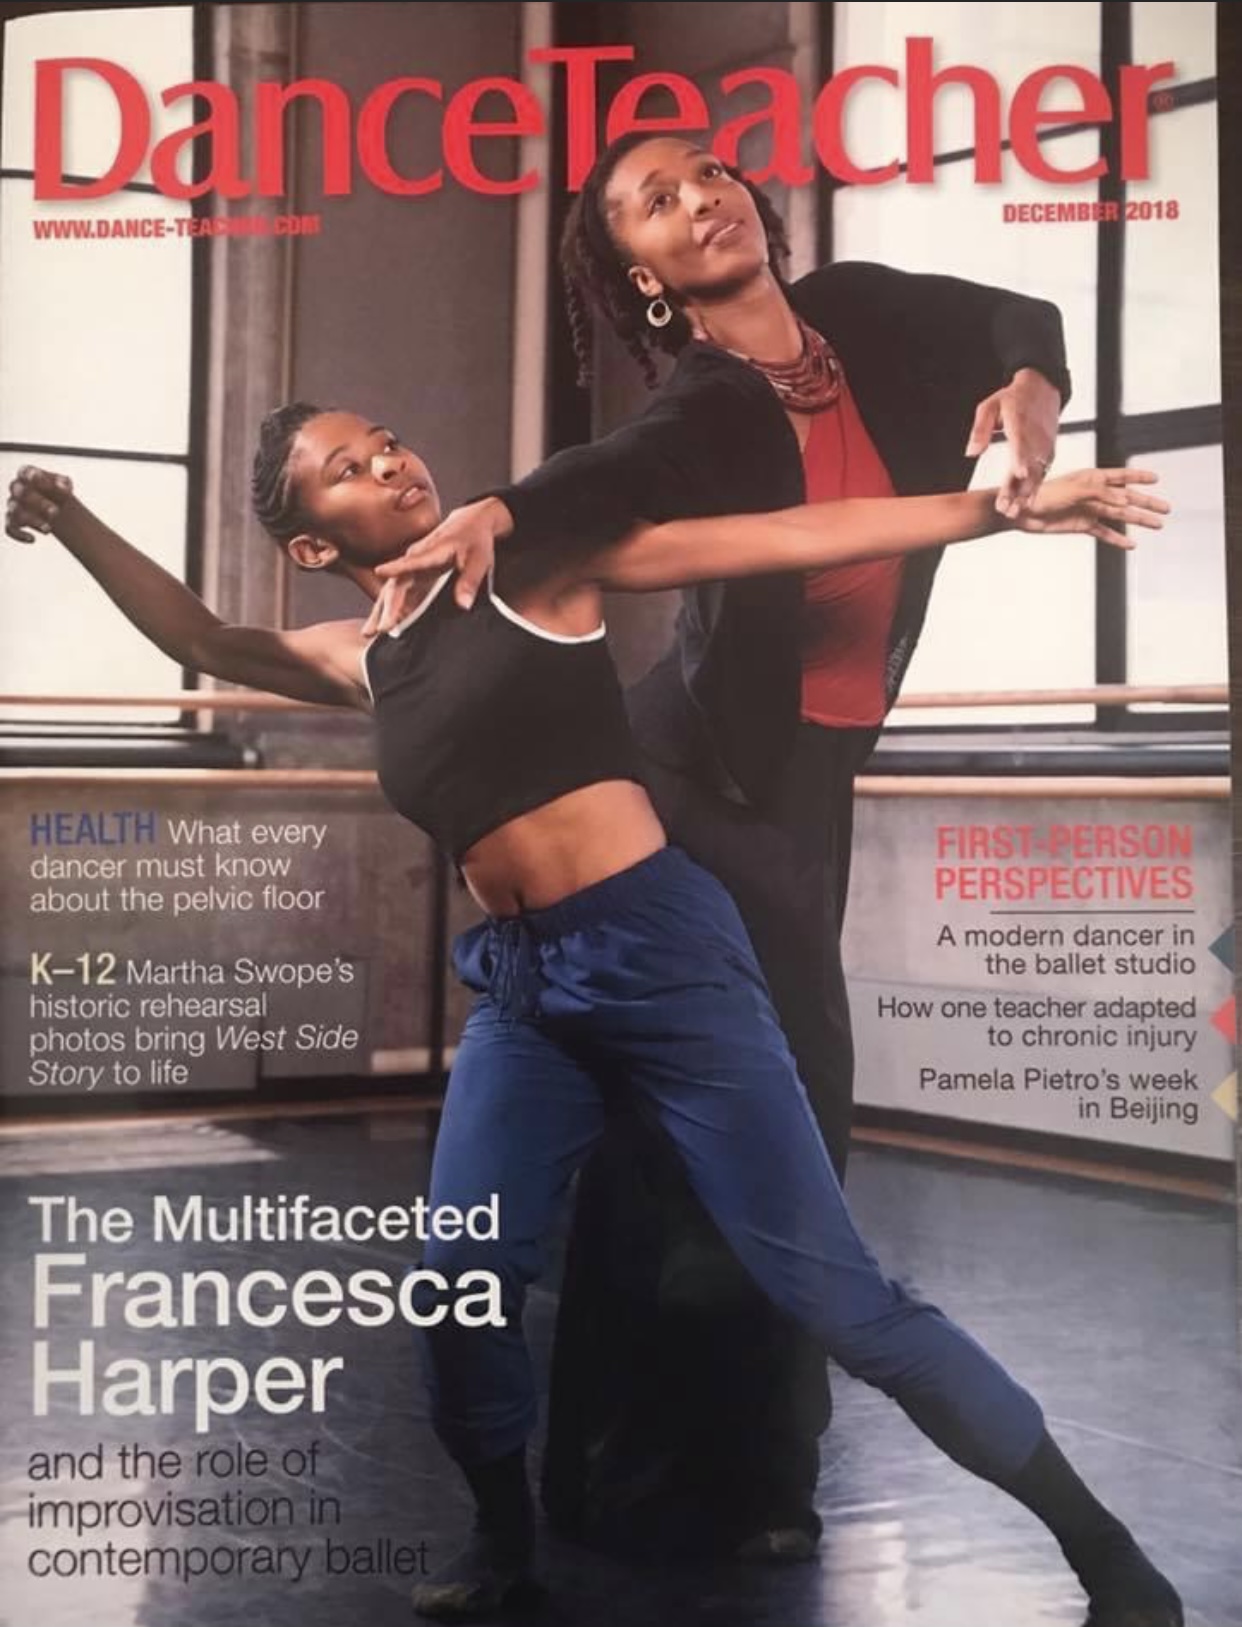 photo of cover of Dance Teacher magazine with red logo, cover features Francesca H. a black woman in a red top and black sweatera and black sweat pants  with young black student in black sleeveless midriff top and blue sweat pants, the are intertwined dancing together in a studio, windows and ballet barre in the background